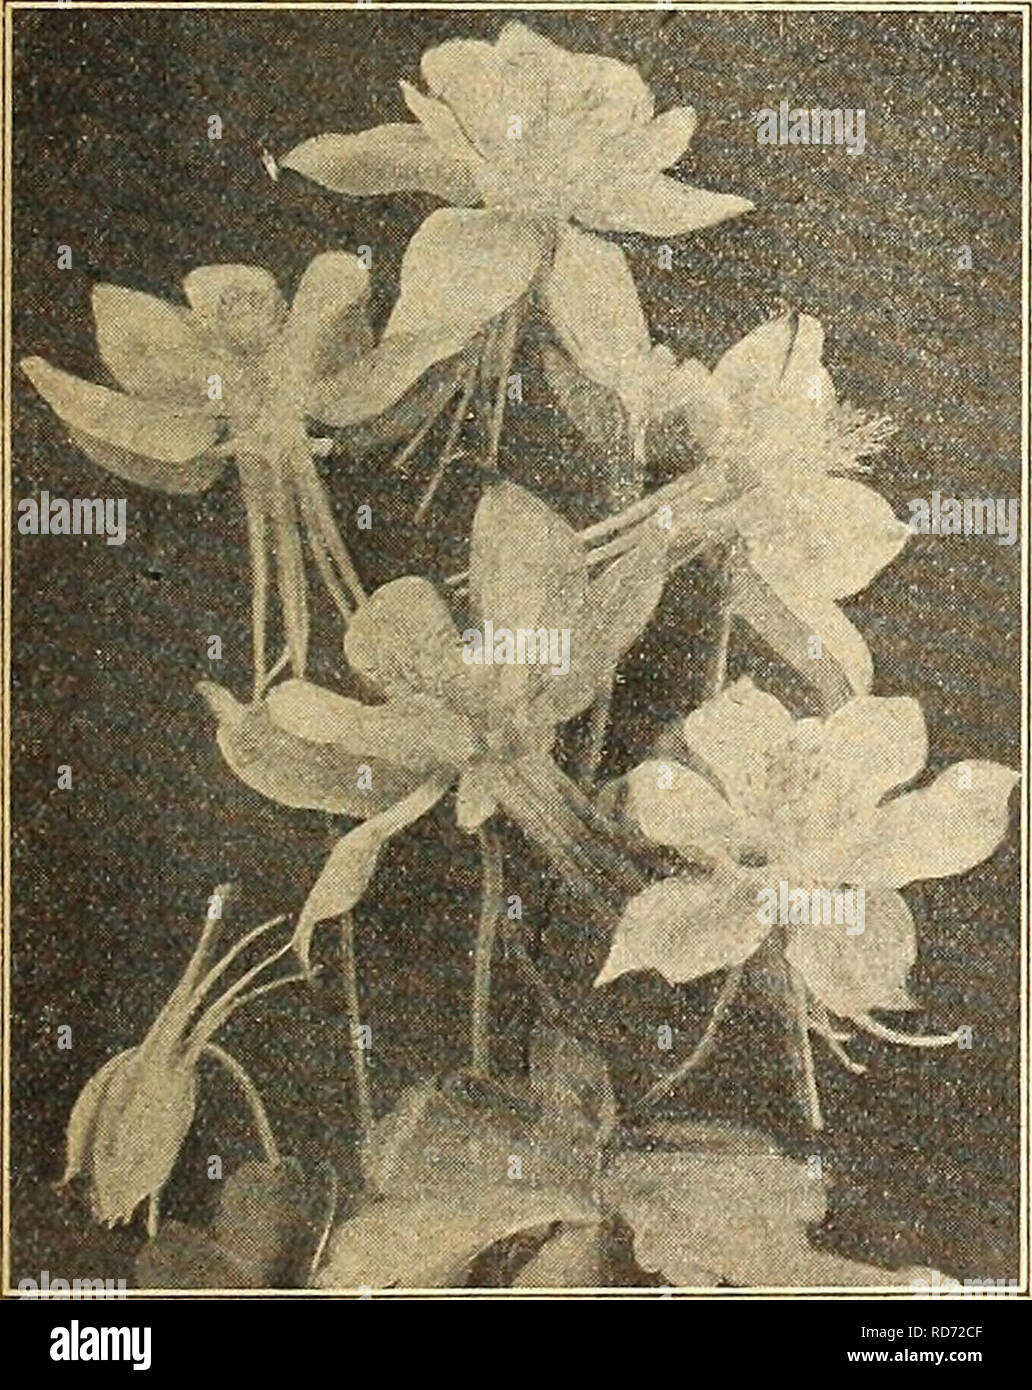 . Currie's farm and garden annual : spring 1920 45th year. Flowers Seeds Catalogs; Bulbs (Plants) Seeds Catalogs; Vegetables Seeds Catalogs; Nurseries (Horticulture) Catalogs; Plants, Ornamental Catalogs; Gardening Equipment and supplies Catalogs. Anemone.. Aquilegia. CAMPANULA—Bluebells. Perhaps the most popular of all border plants. C. Medium (Canterbury Bells)—This strikingly beautiful biennial is an exceed- ingly profuse bloomer, the large bell-shaped flowers in white, pink and shades of blue being very effective. Each 25c; per doz. $2.50. C. Lactiflora Coerulea—^Perennial variety. Pale bl Stock Photo